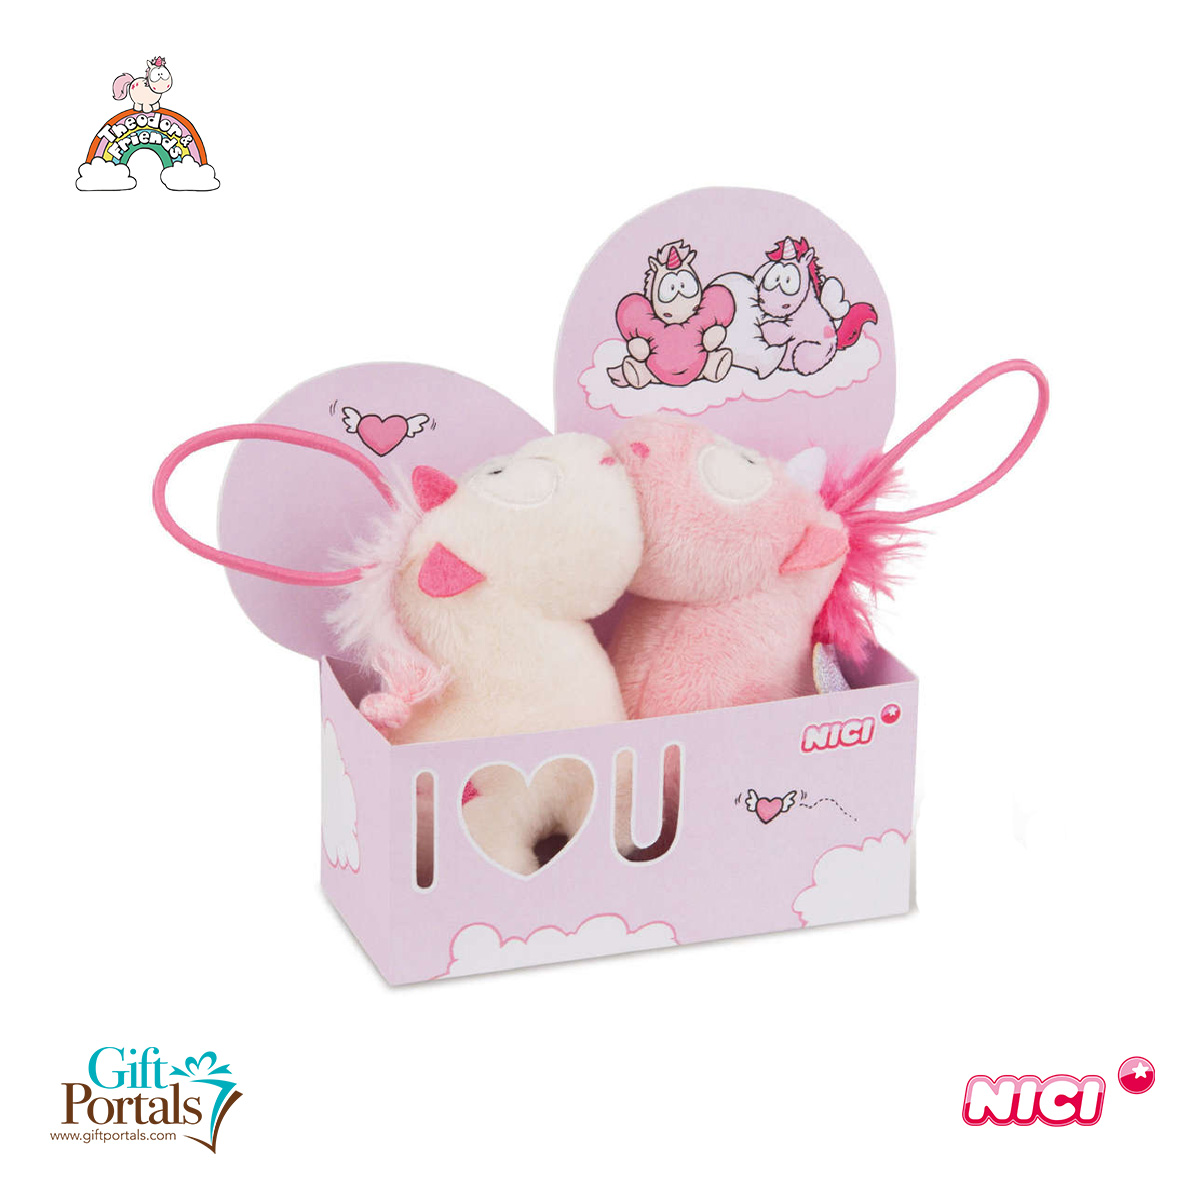 Nici Couple-Keyholder Theodor & Pink Harmony 9cm Each, In Gift Box